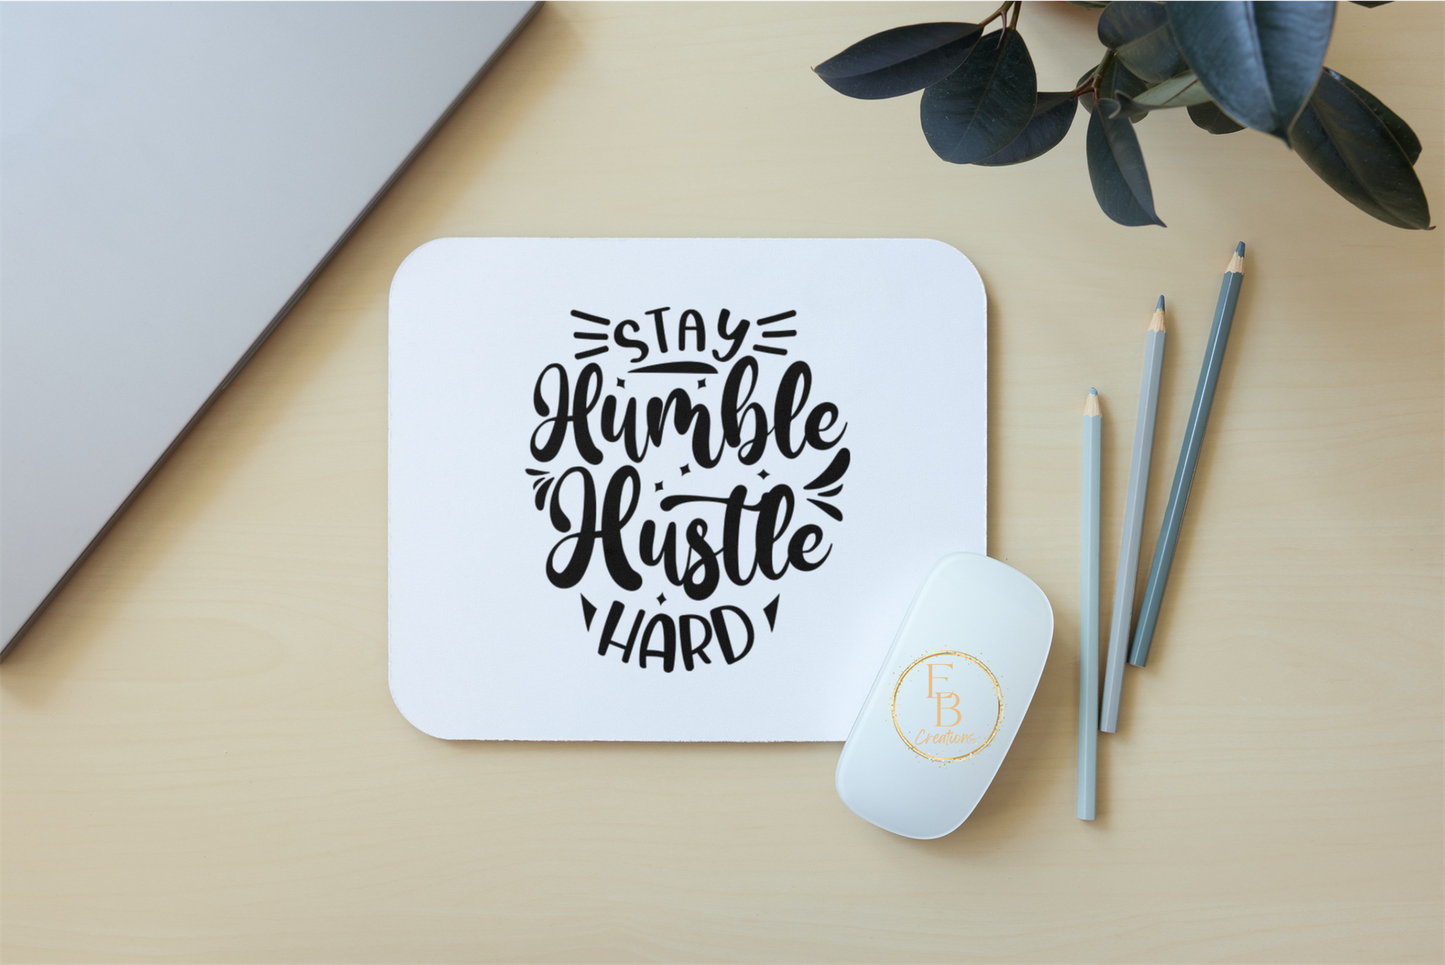 Stay humble hustle hard Mouse pad | Office accessories and desk supplies | Pad for mouse - Eb Creations Stay humble hustle hard Mouse pad | Office accessories and desk supplies | Pad for mouse